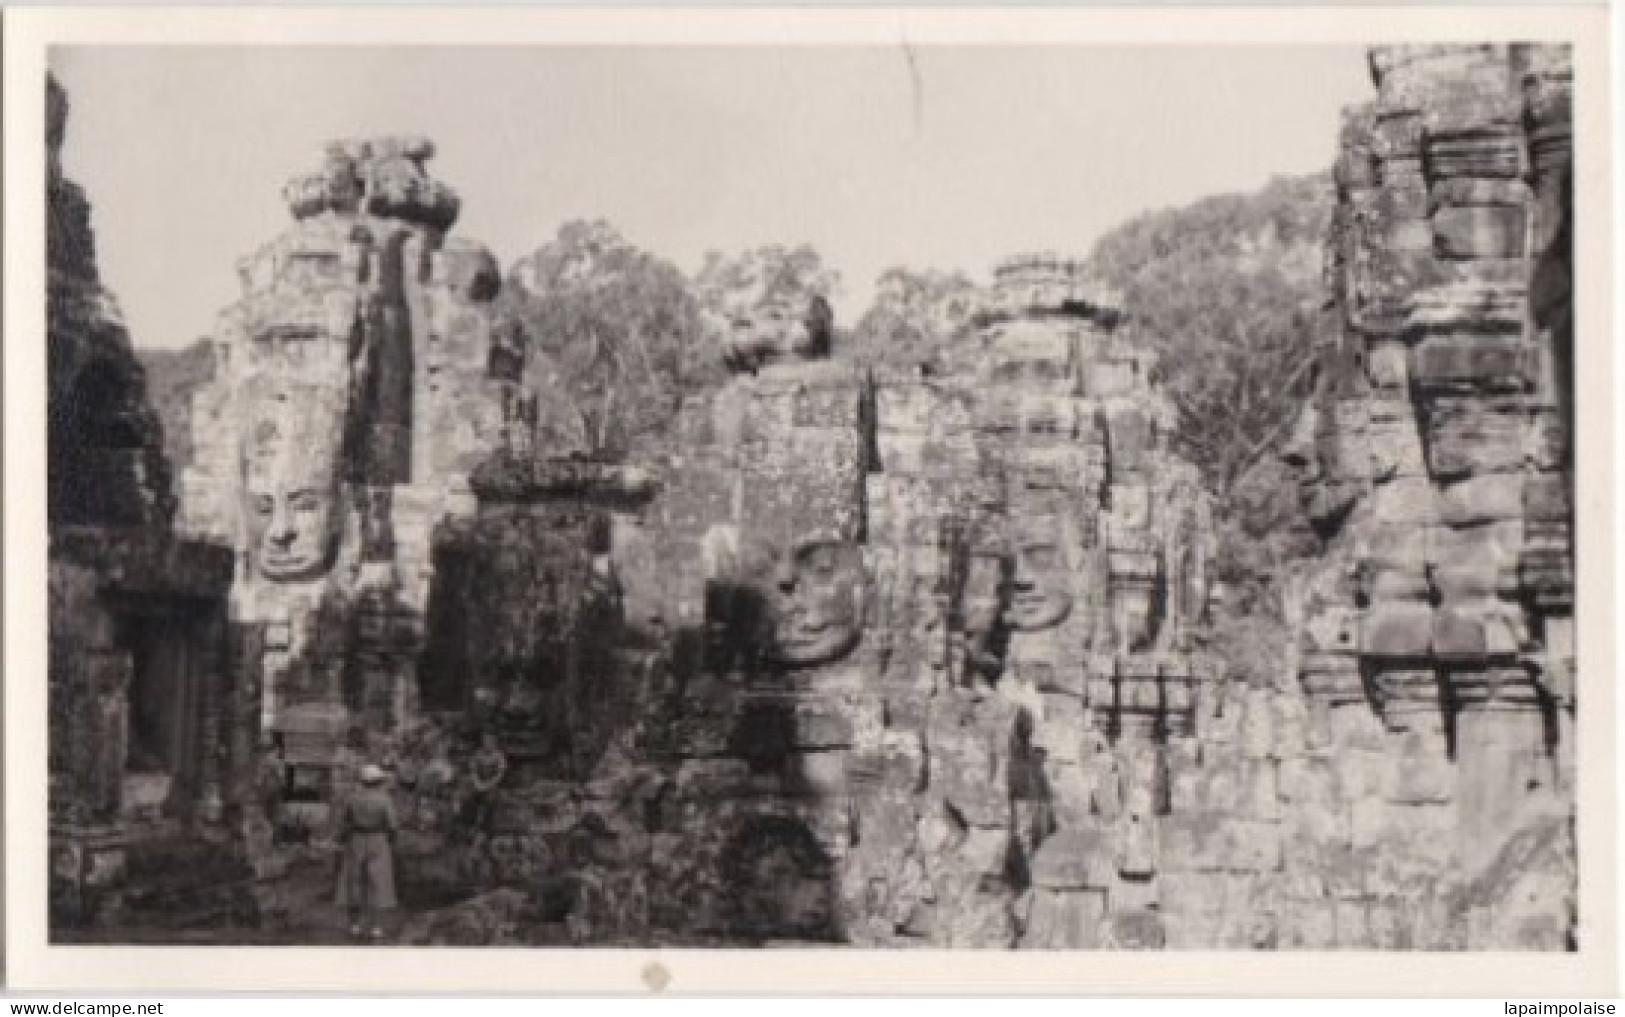 4 Photos INDOCHINE CAMBODGE ANGKOR THOM Art Khmer Statue Monumental Tours Bas  Relief Réf 30372 - Asien